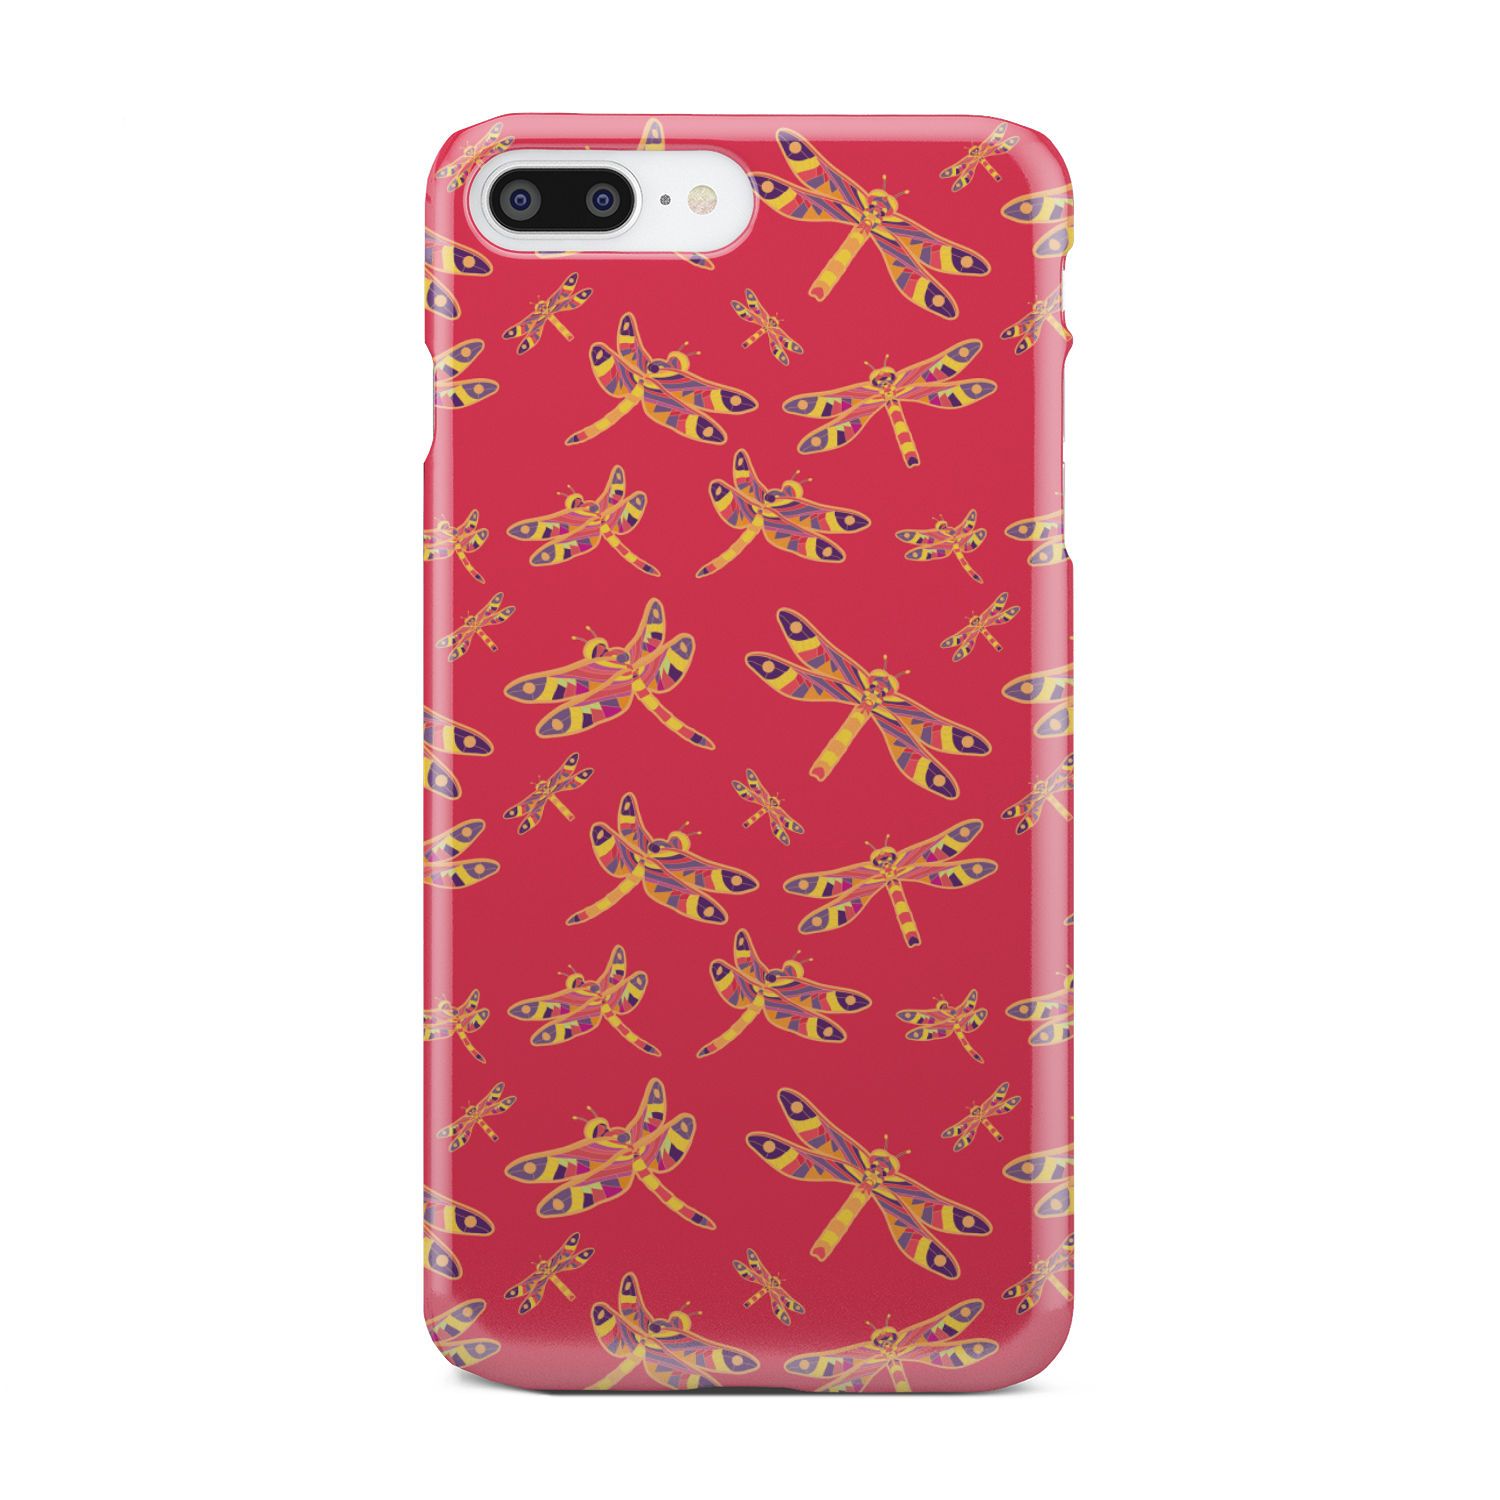 Gathering Rouge Phone Case Phone Case wc-fulfillment iPhone 7 Plus 